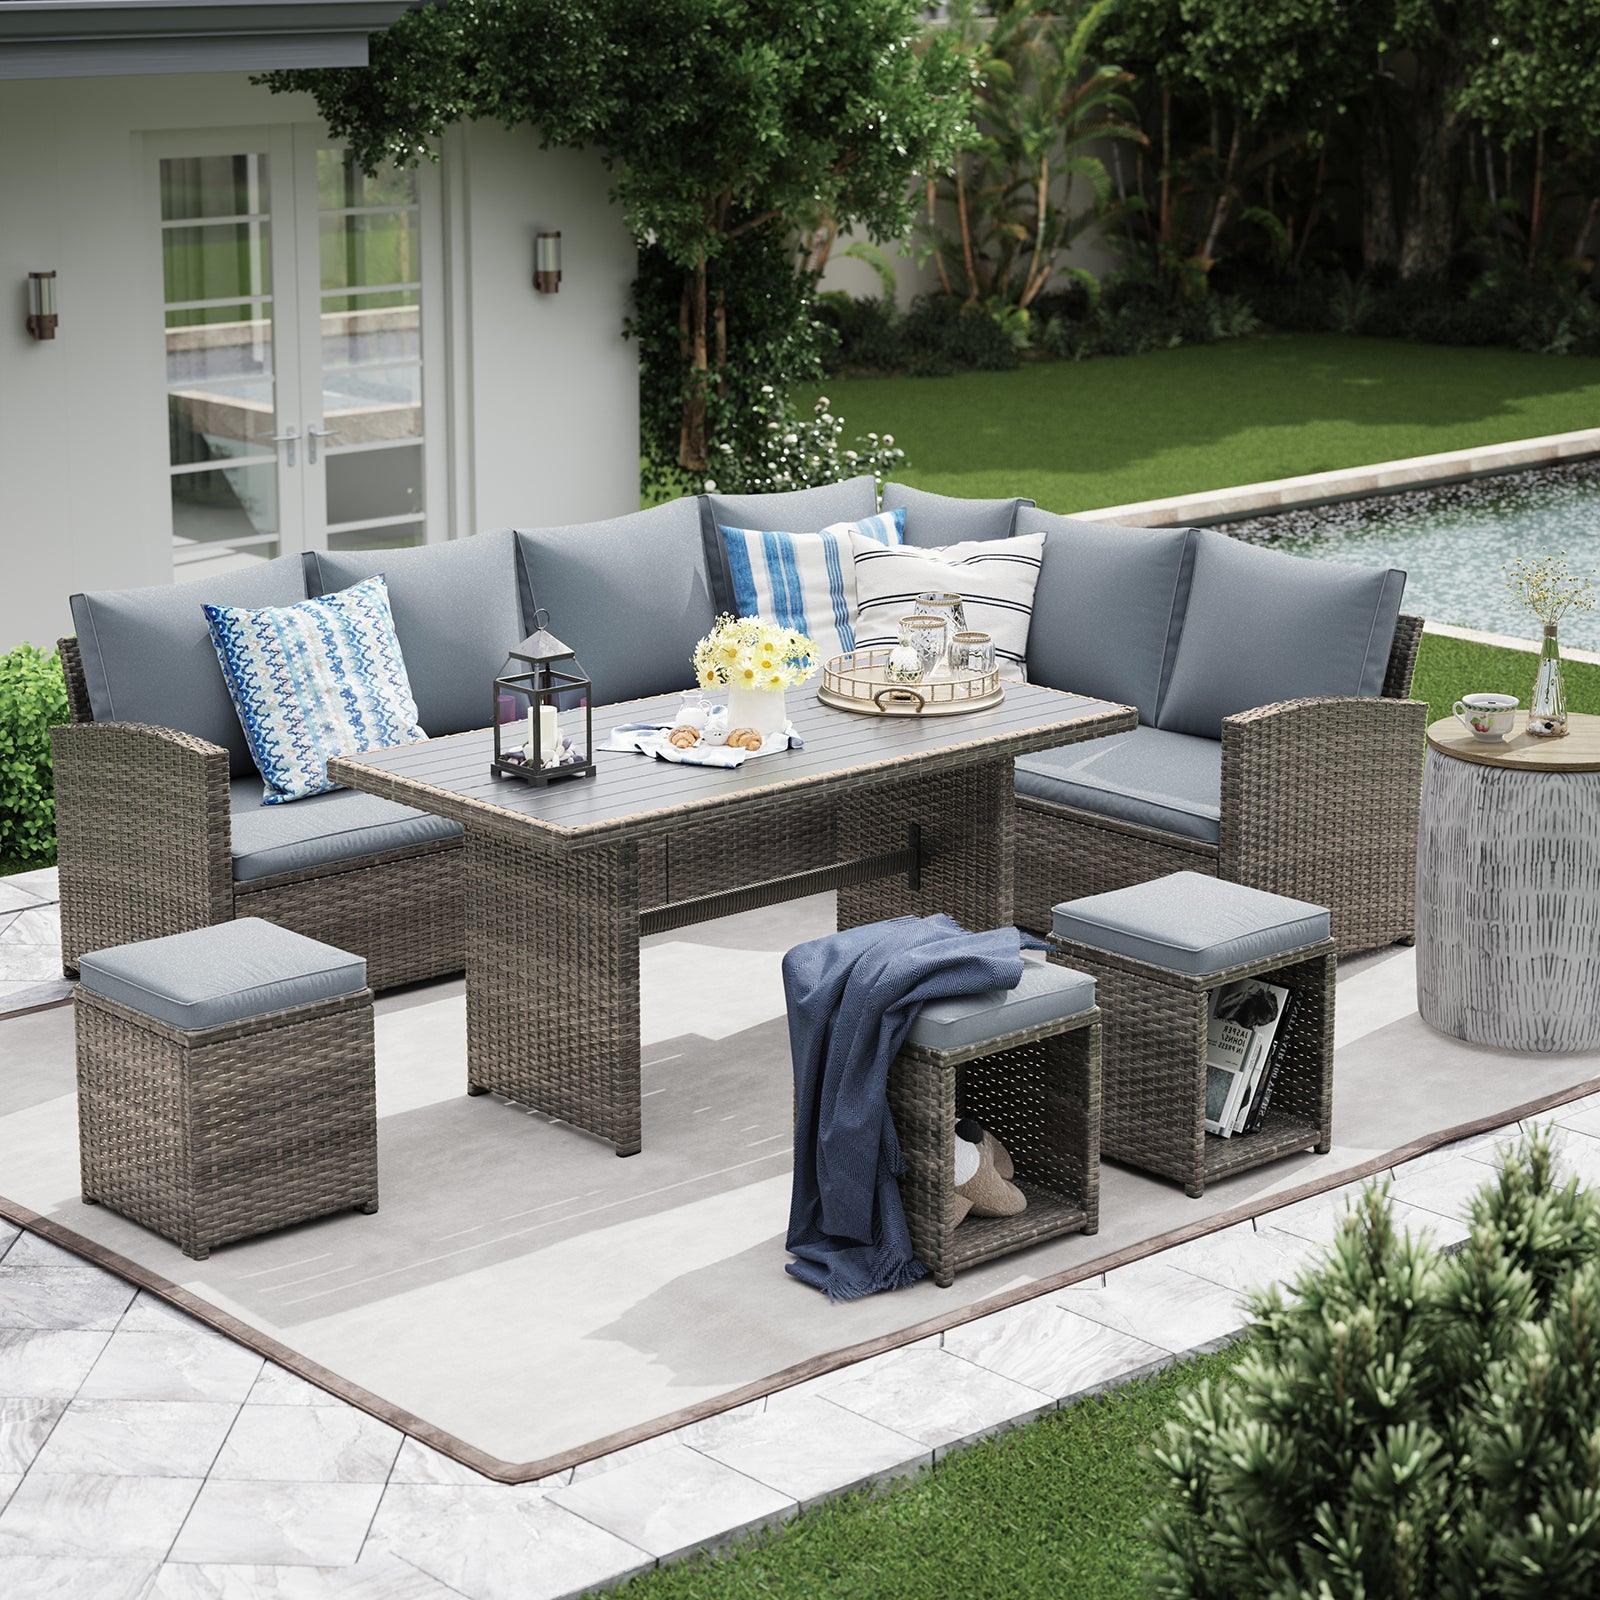 Amberley 7-pc. Outdoor Sectional Sofa Set, Patio Dining Set, Grey, Beige and Aegean Blue hot sale#Color_grey